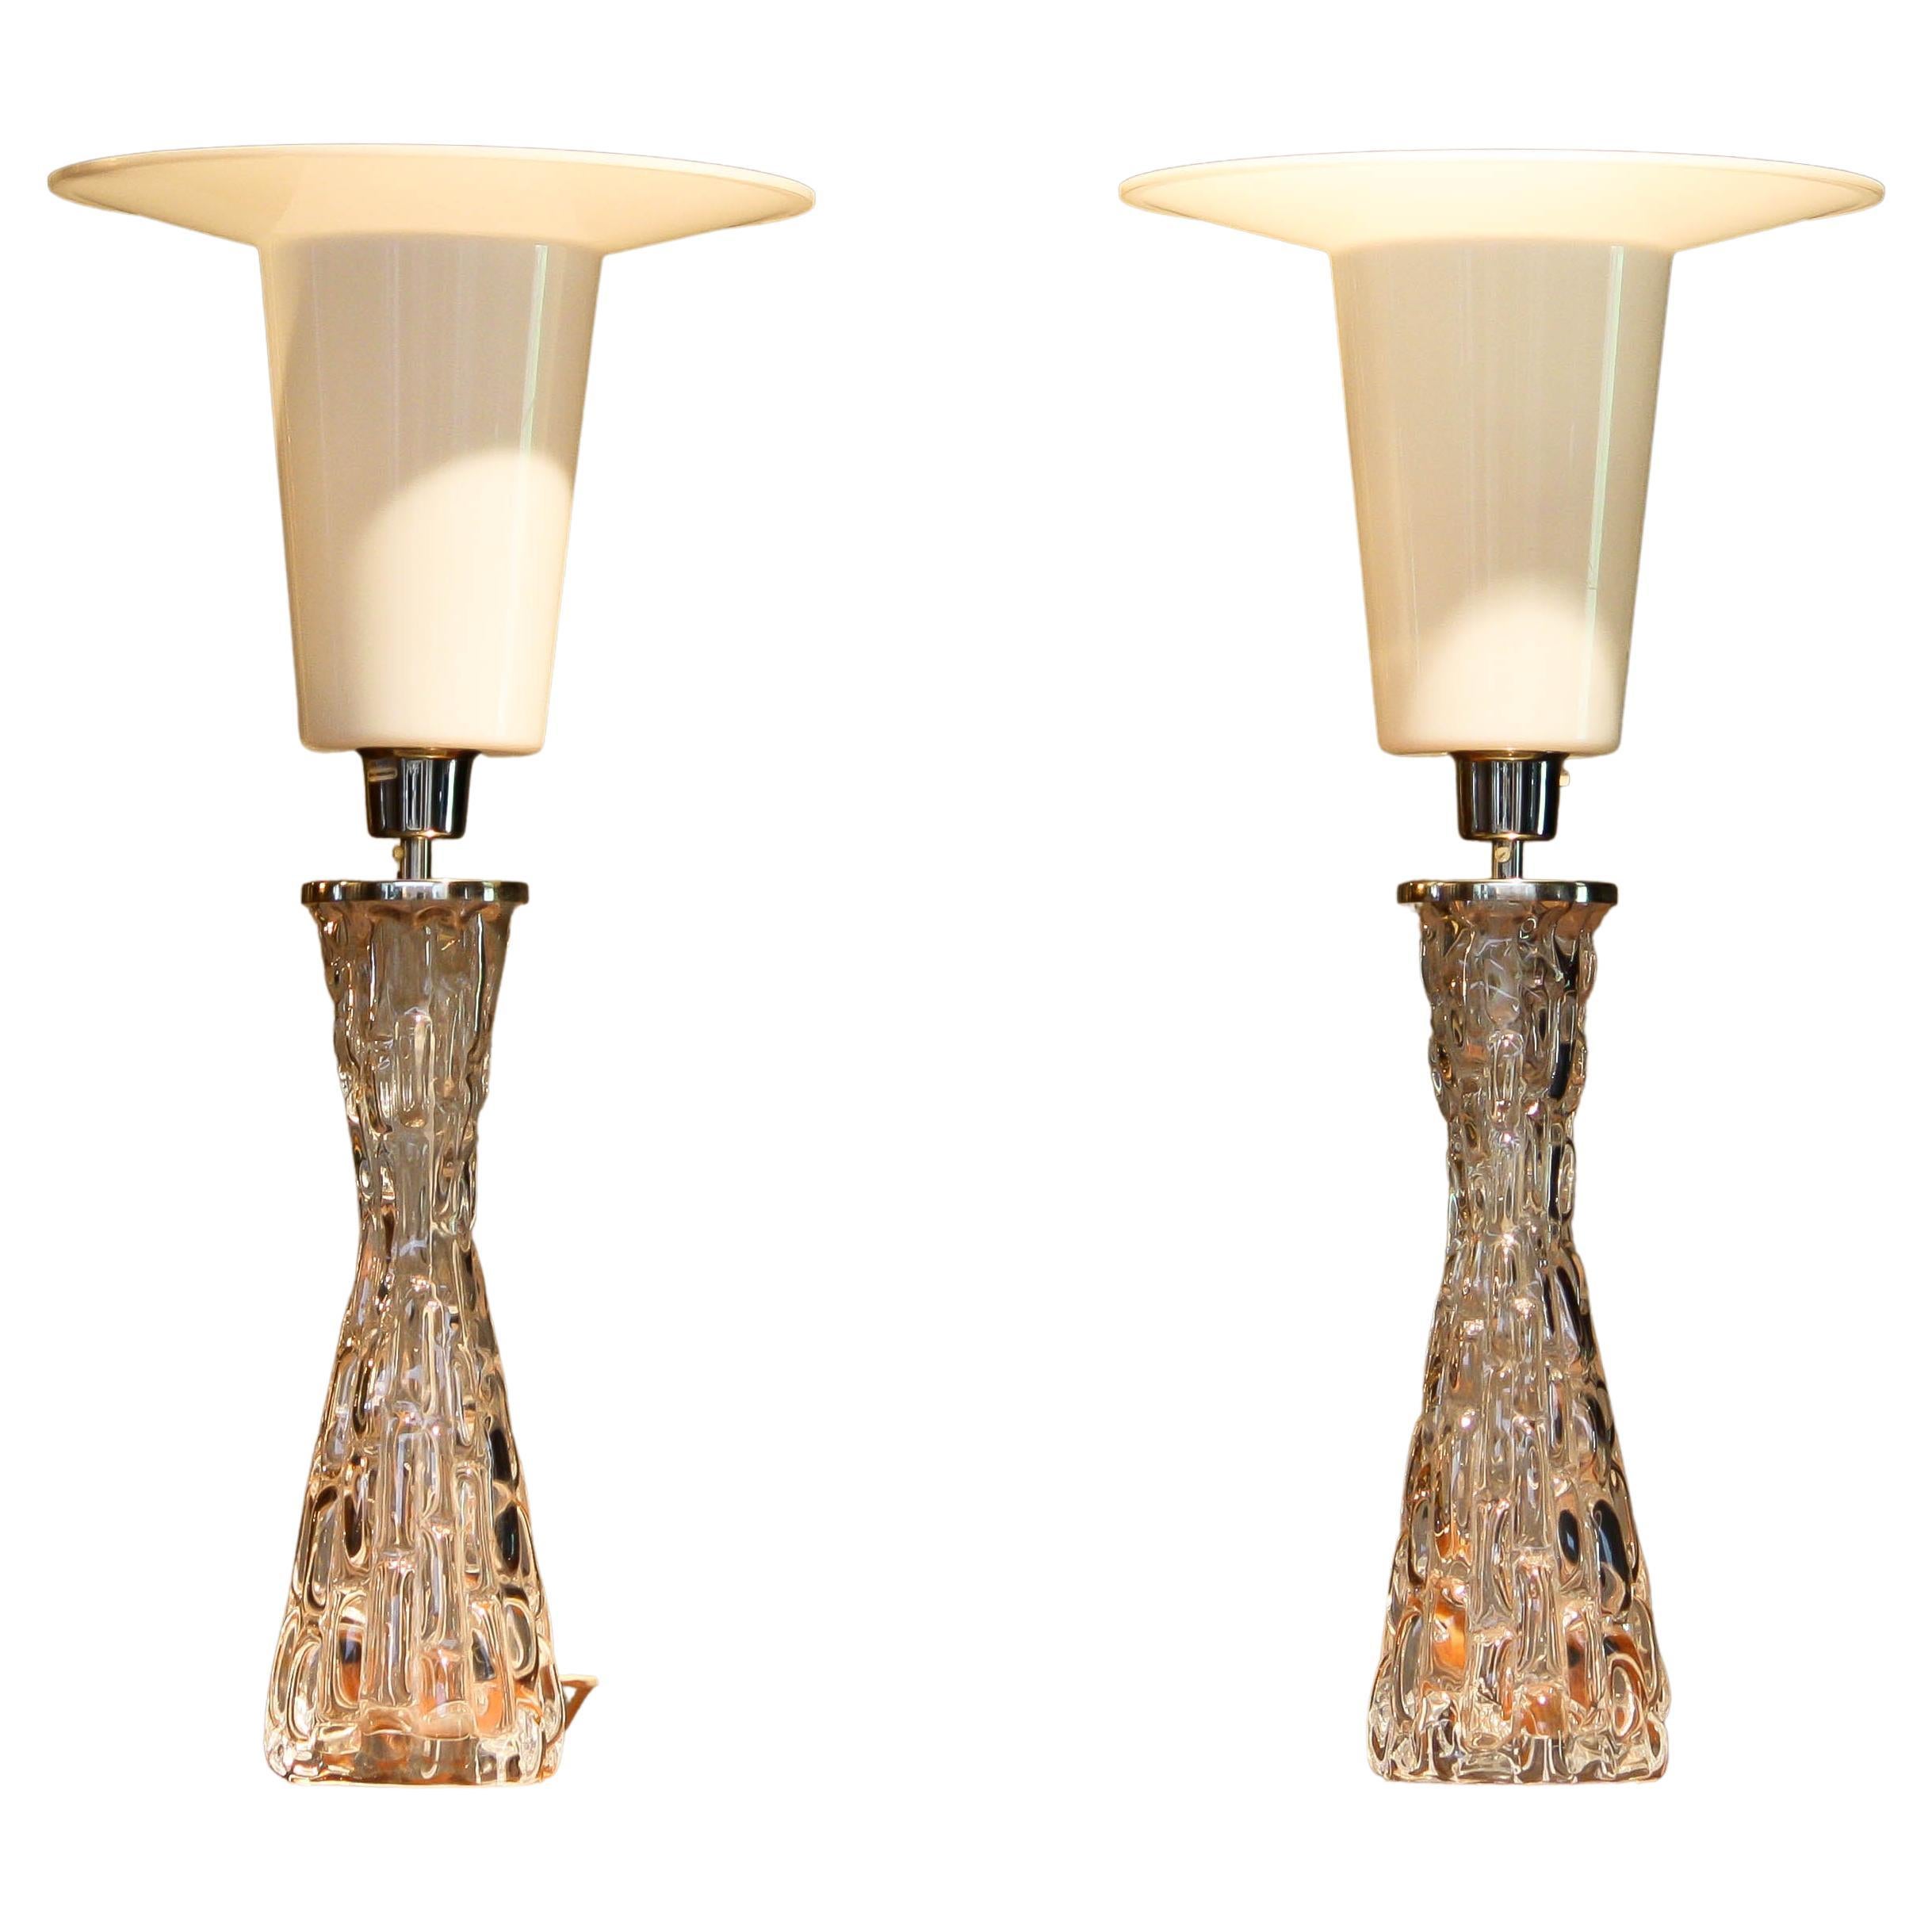 Beautiful set of two clear crystal and chromed table lamps designed by Carl Fagerlund for Orrefors Crystal in Sweden.
consists one screw fitting size E27 / 28 110 and 230 volts with a maximum of 100Watts each.
Electronic parts as well as the